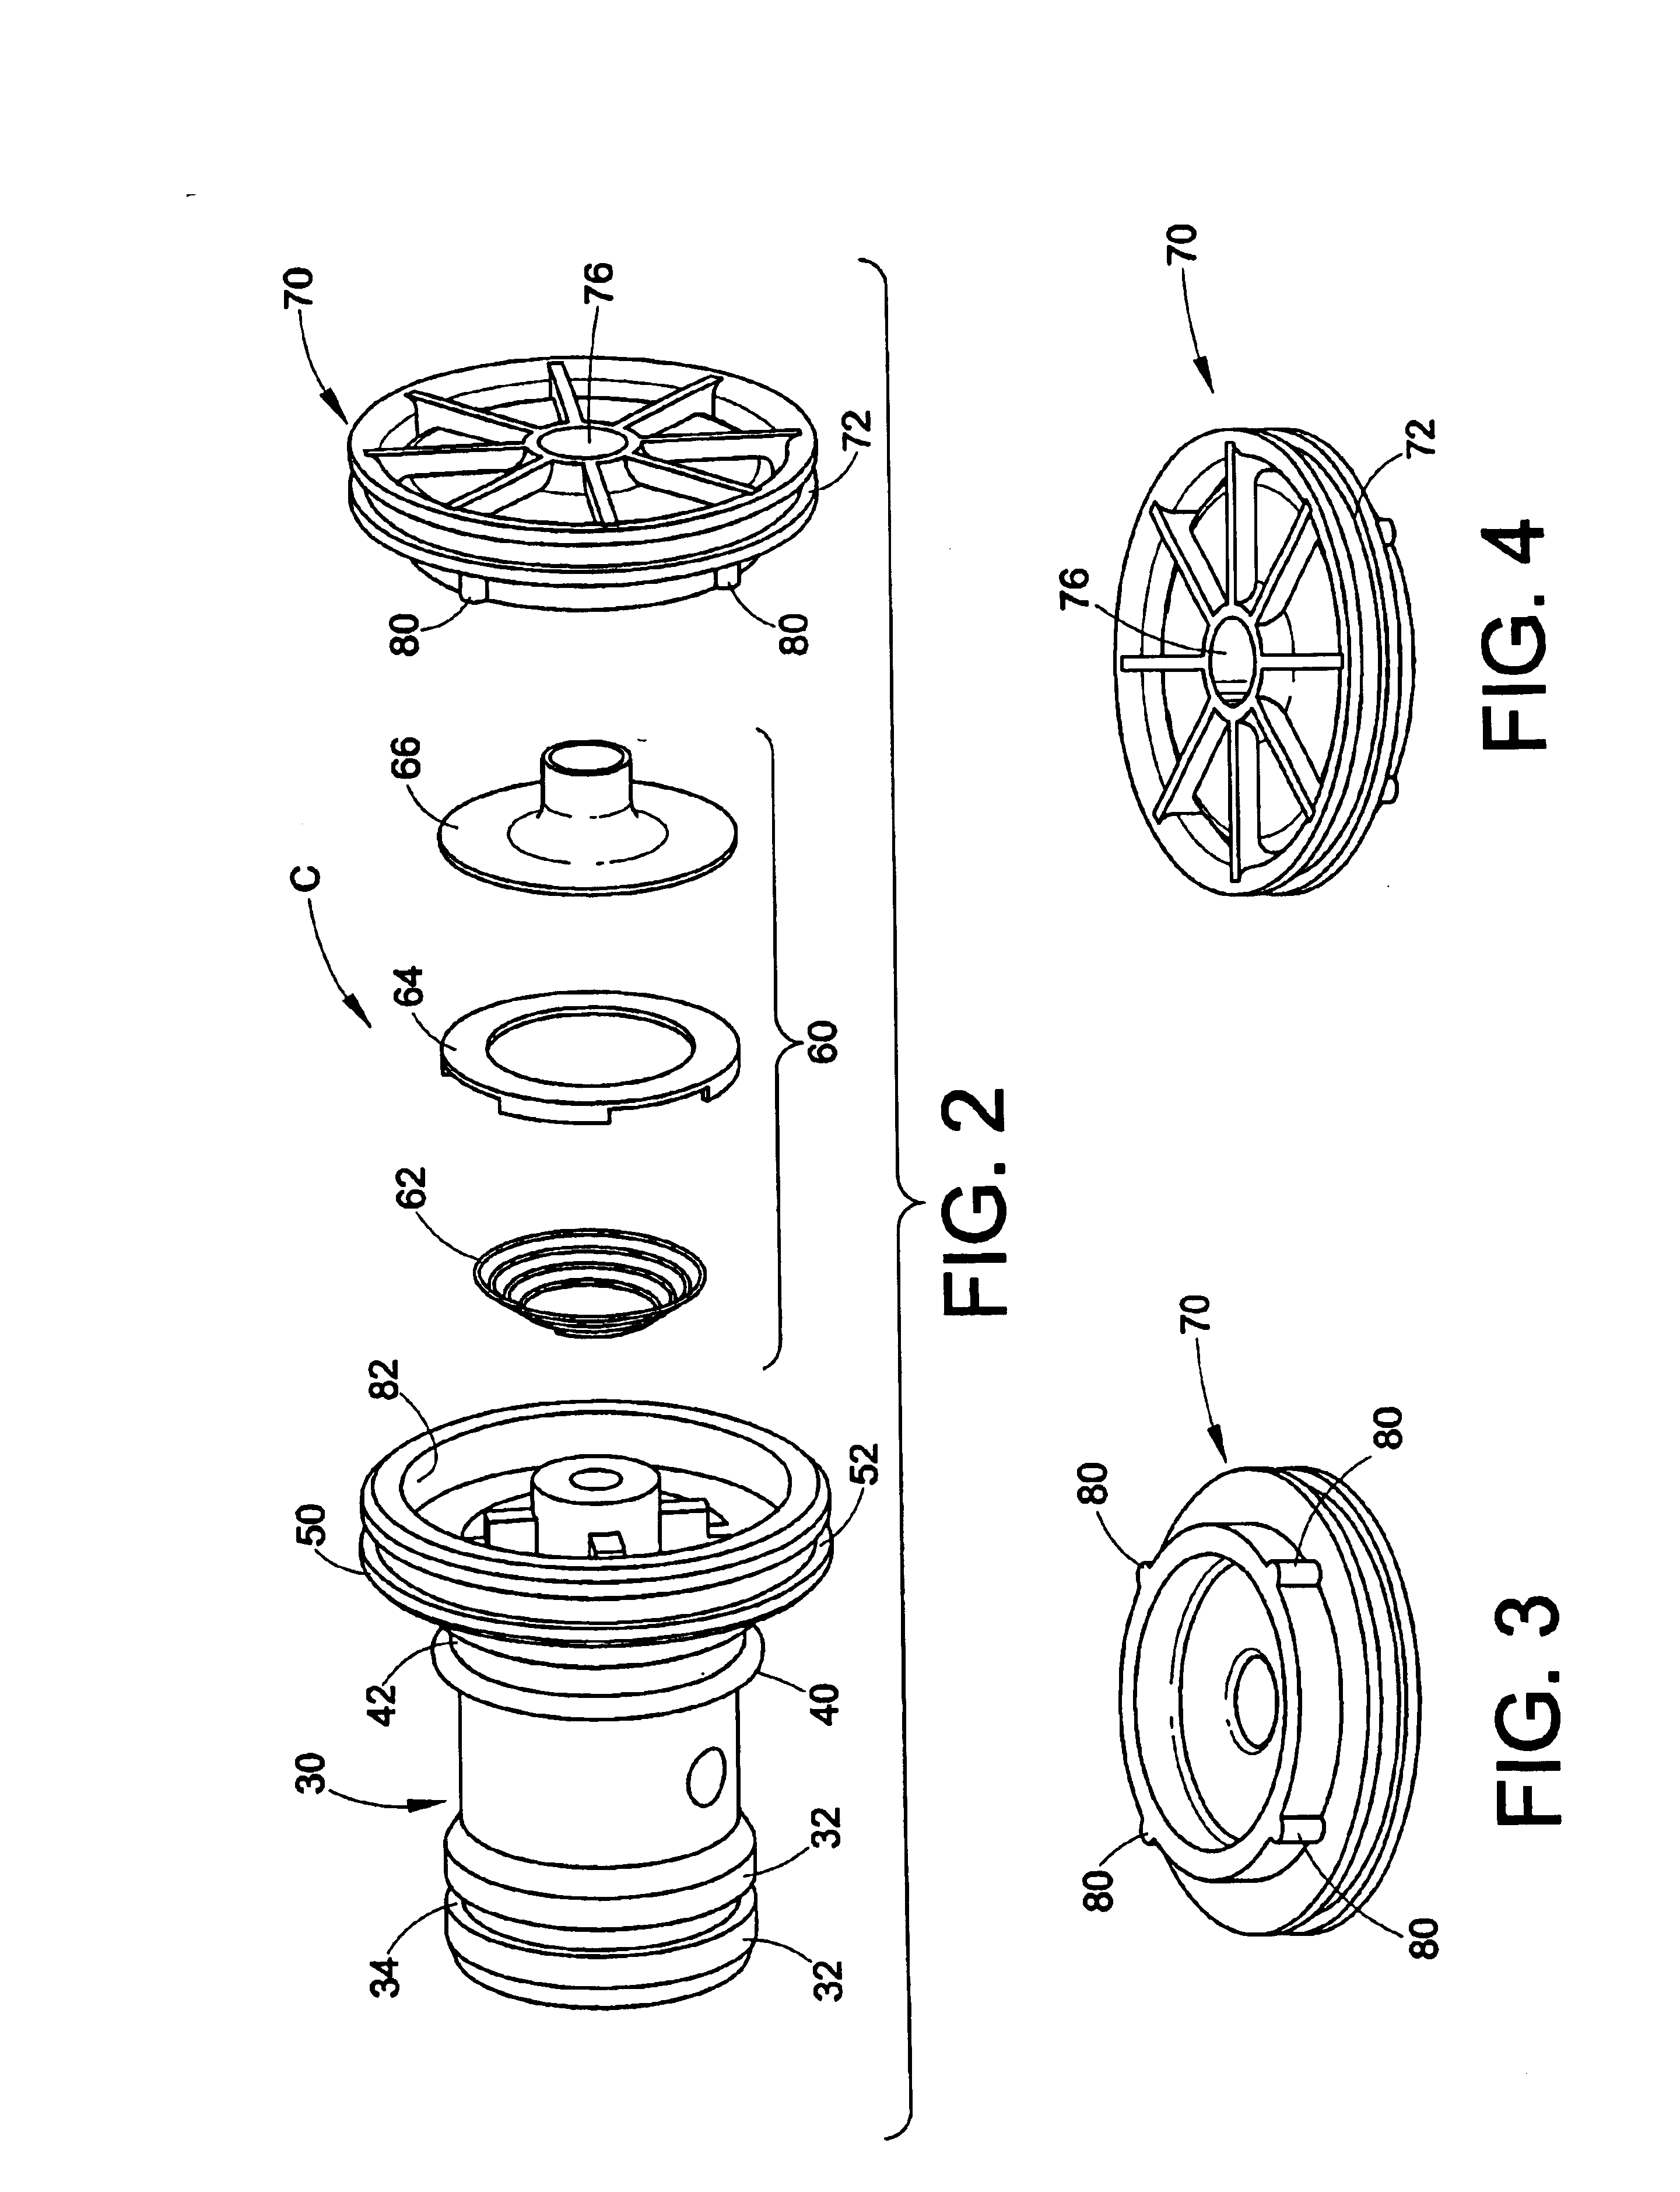 Non-metallic, snap-together subsasembly of internal double check valve